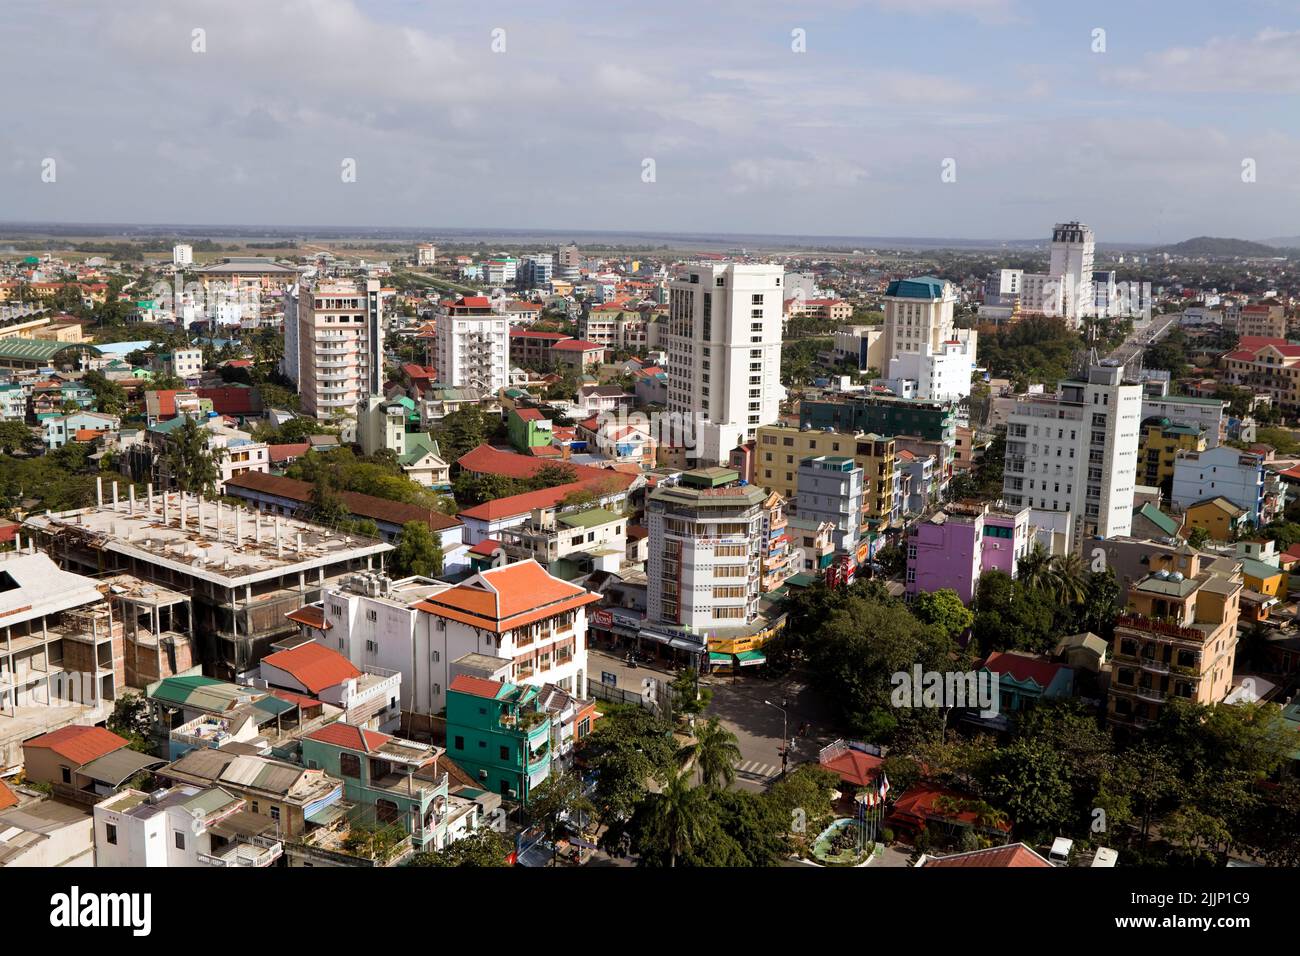 Hue, Vietnam - December 14, 2012: High angle view of the downtown skyline of Hue, Thua Thien – Hue province, Vietnam. Stock Photo